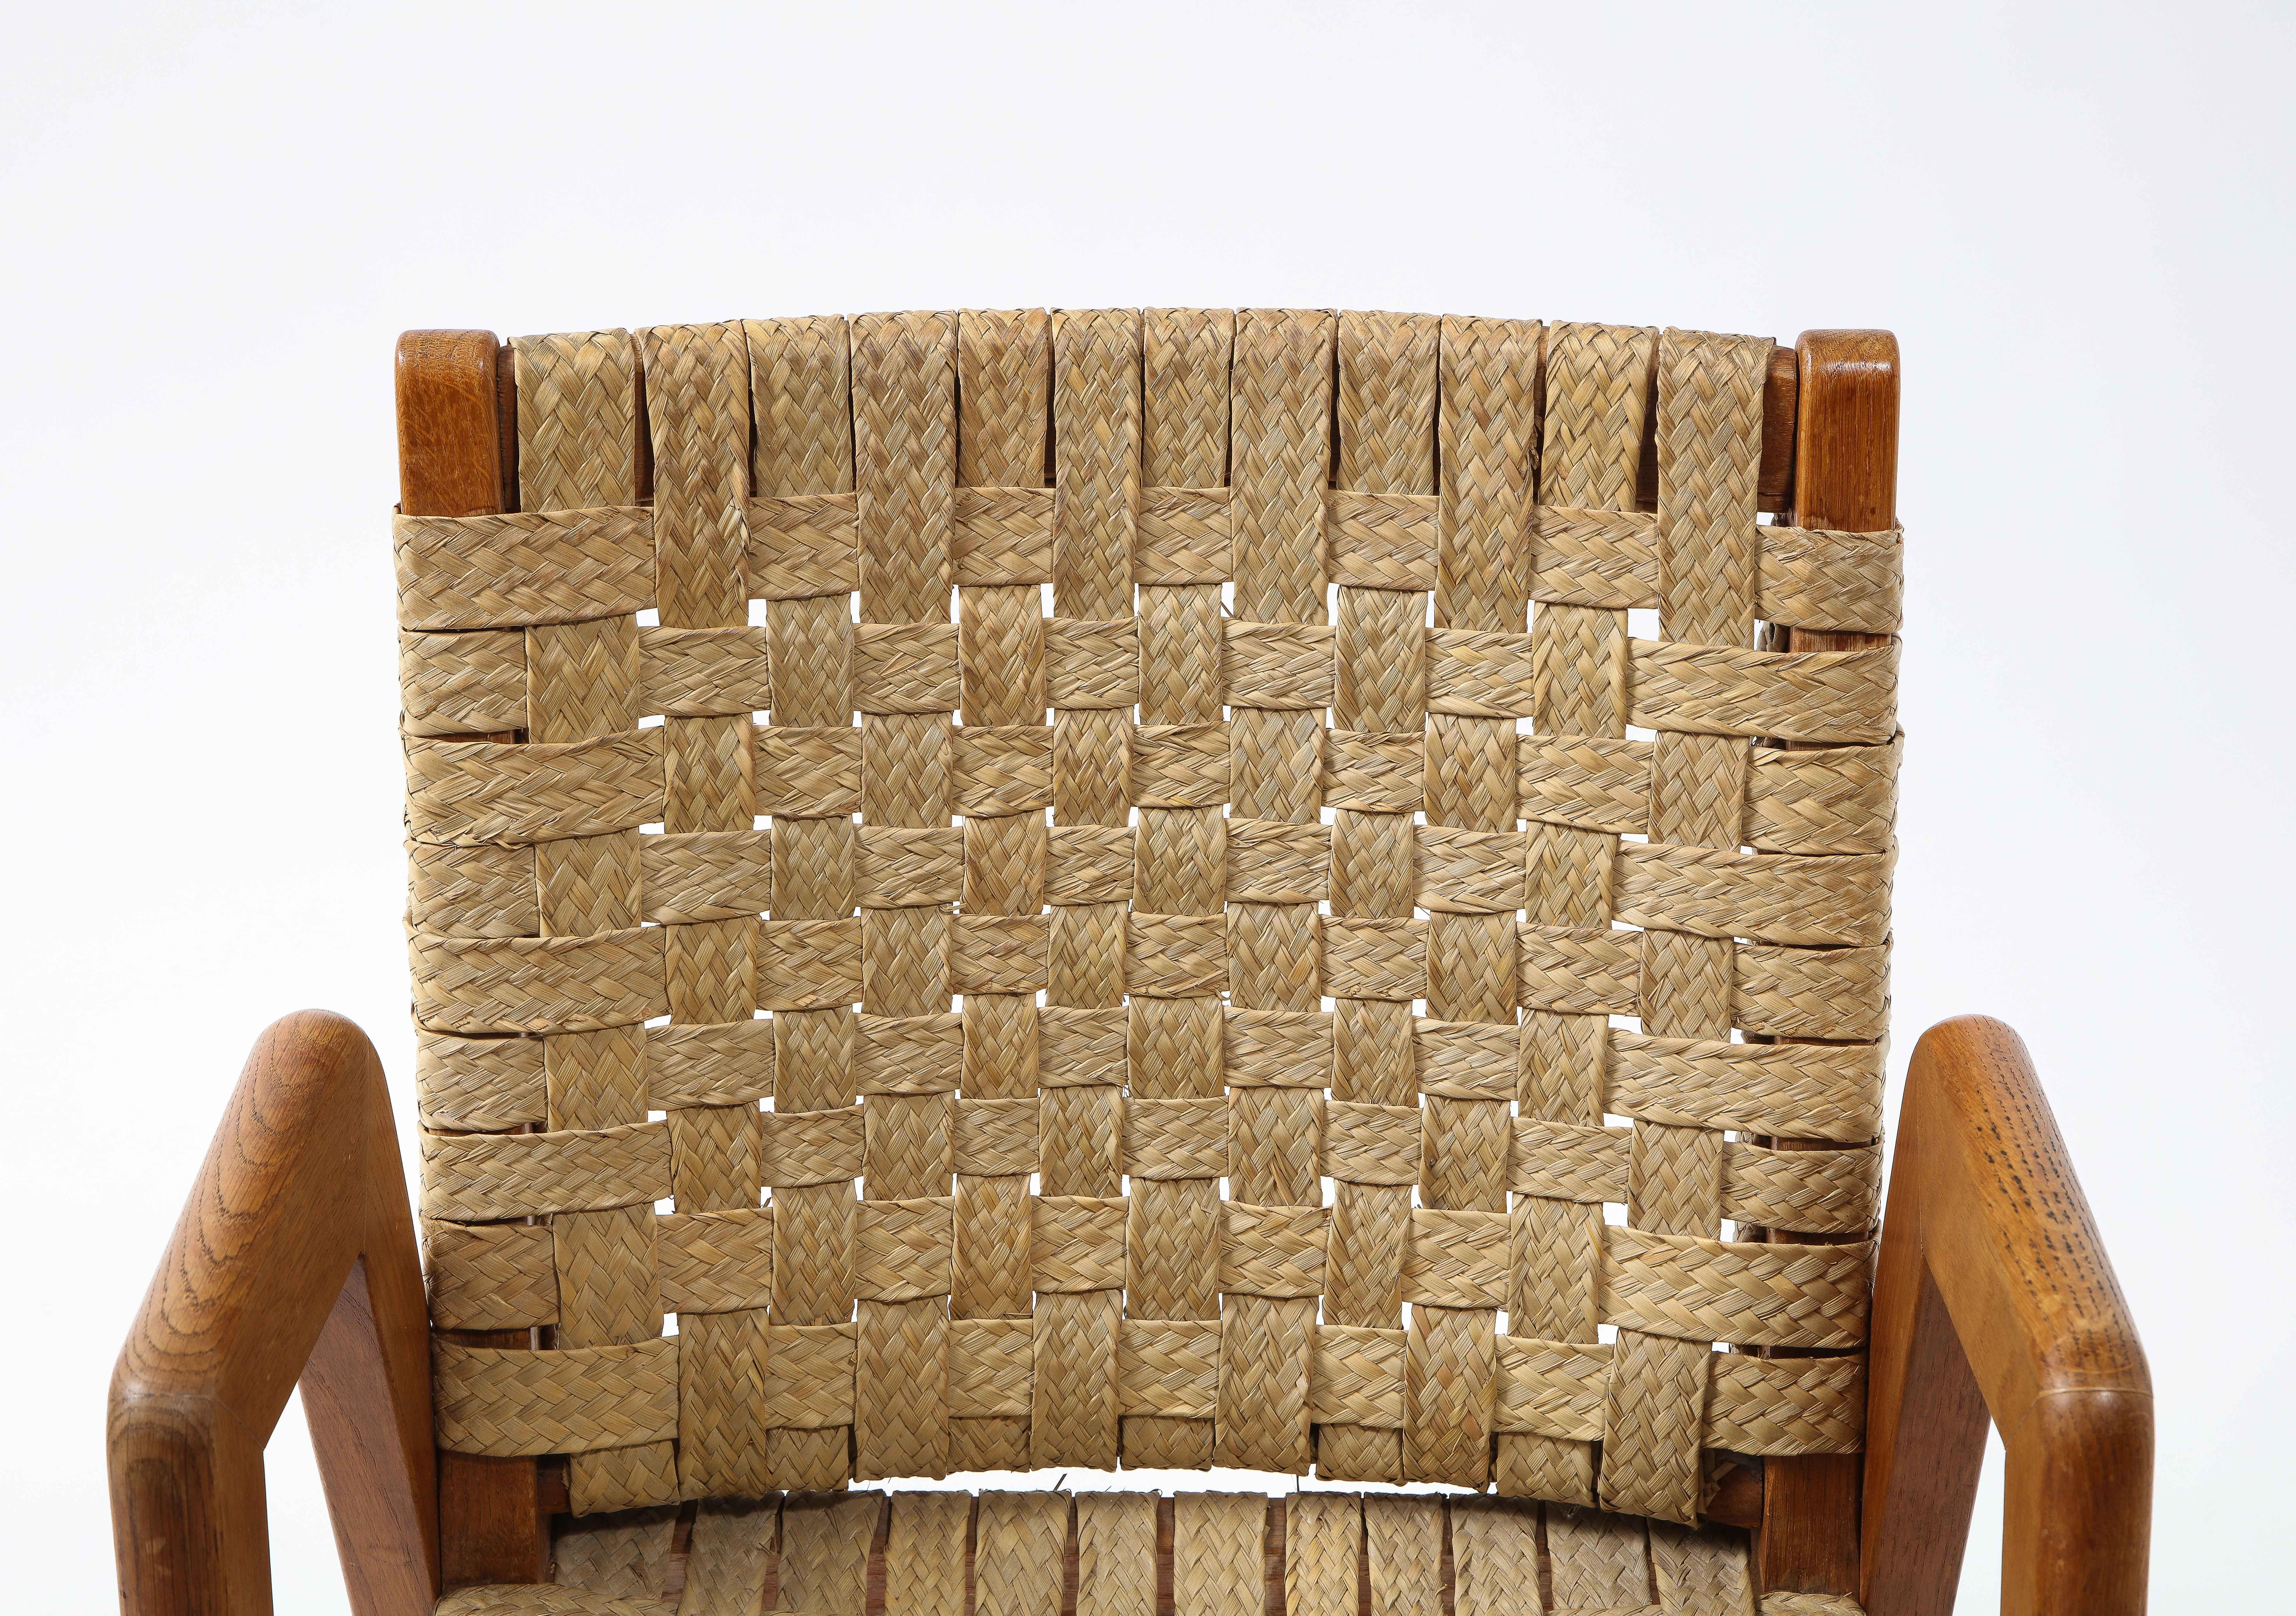 Sculptural Mid-century Rattan and teak side chair, France, 1960's.

Metal bolt fasteners are expressed on the sides. 

Rattan is in very good condition.

Sit is very upright, best used as an accent piece.